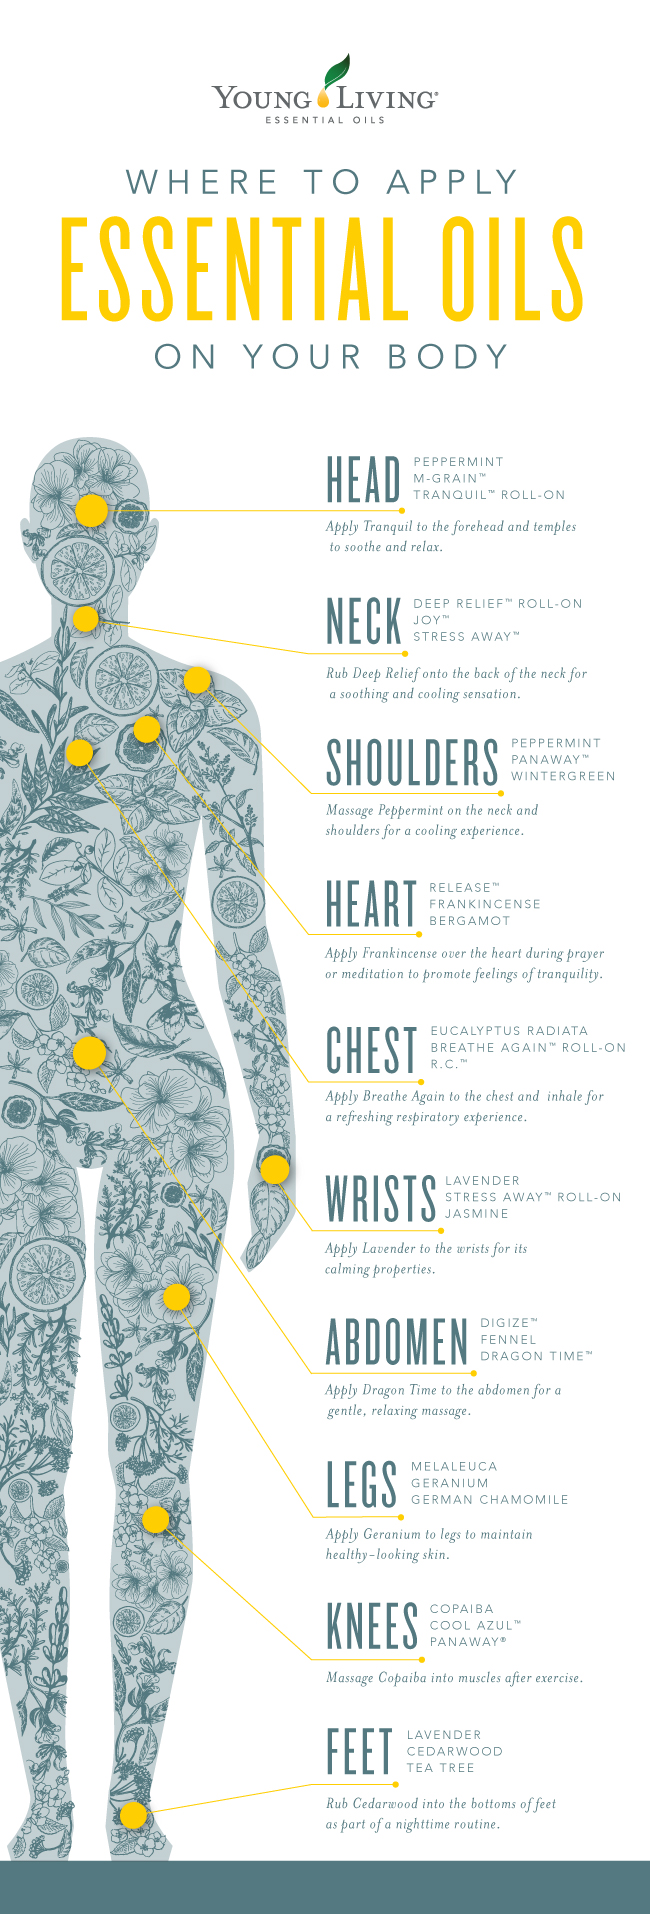 Where-to-apply-essential-oils-on-your-body_Infographic